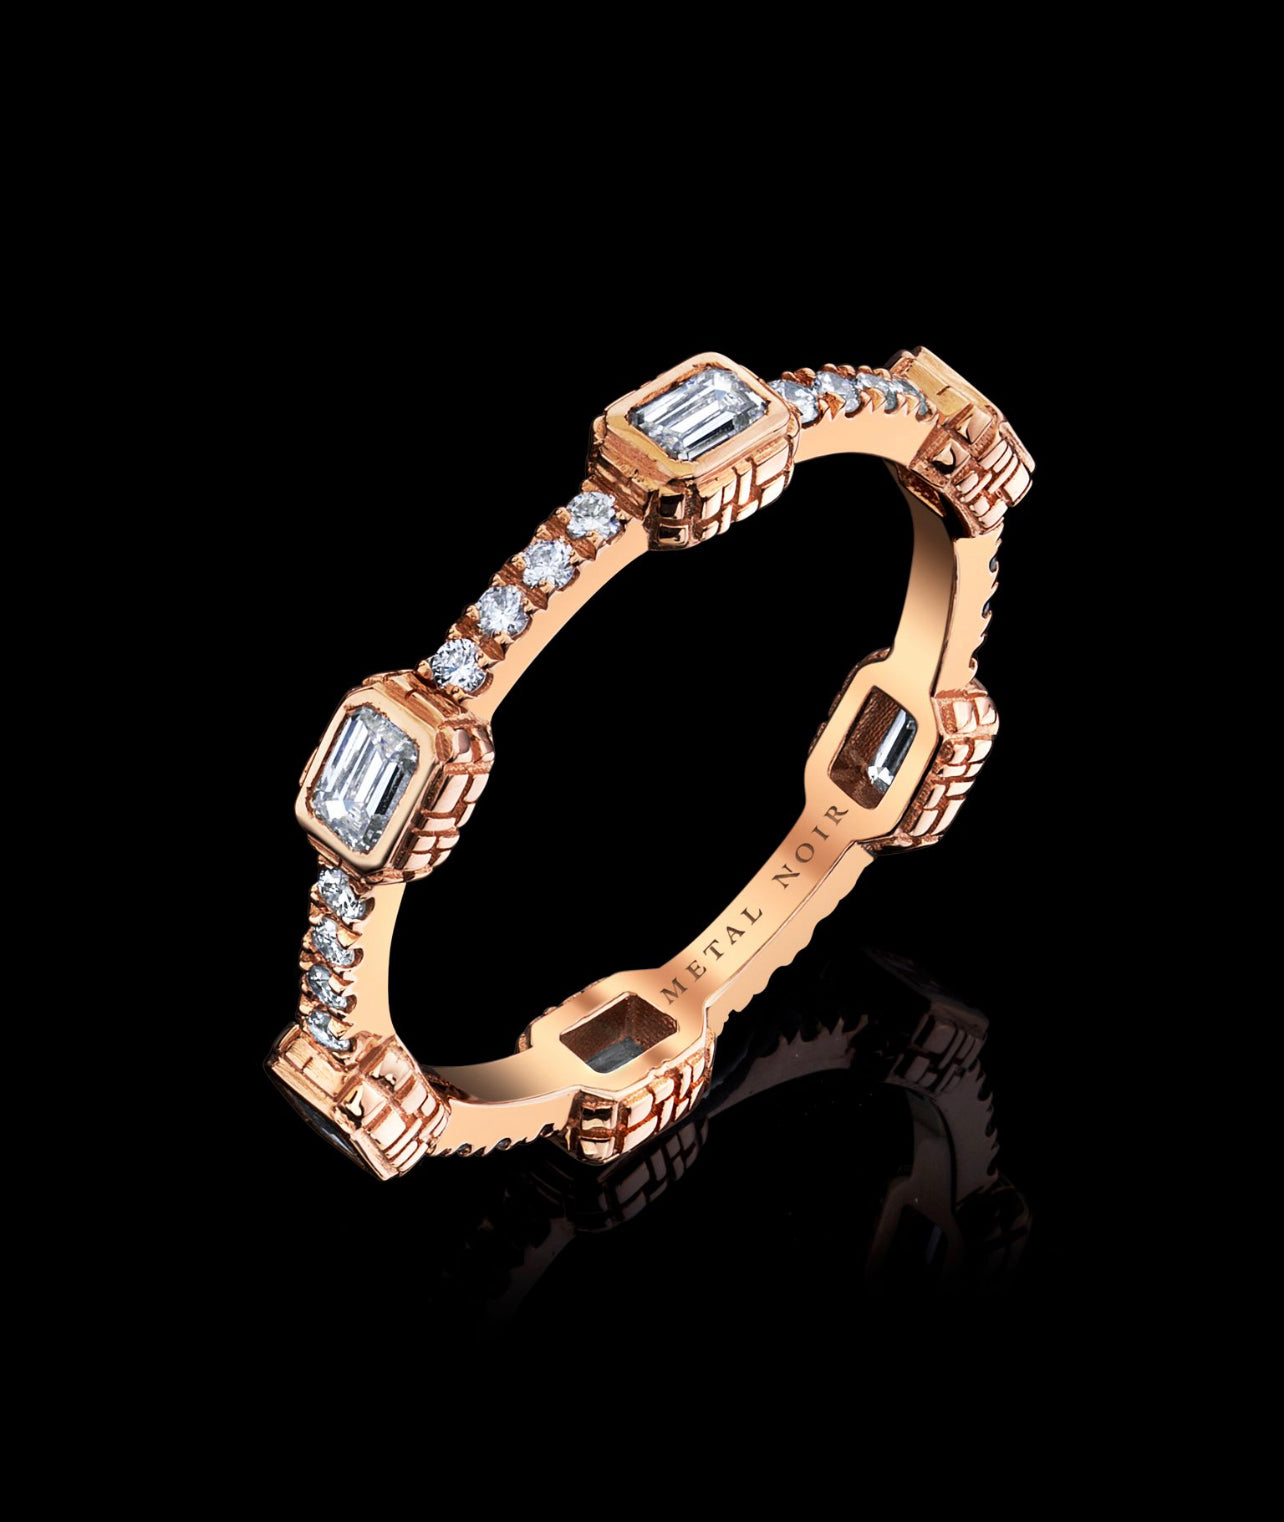 Ultra Thin Collection ‘SIX’ Eternity Diamond Ring with 10 Pointer Emerald Cut diamonds